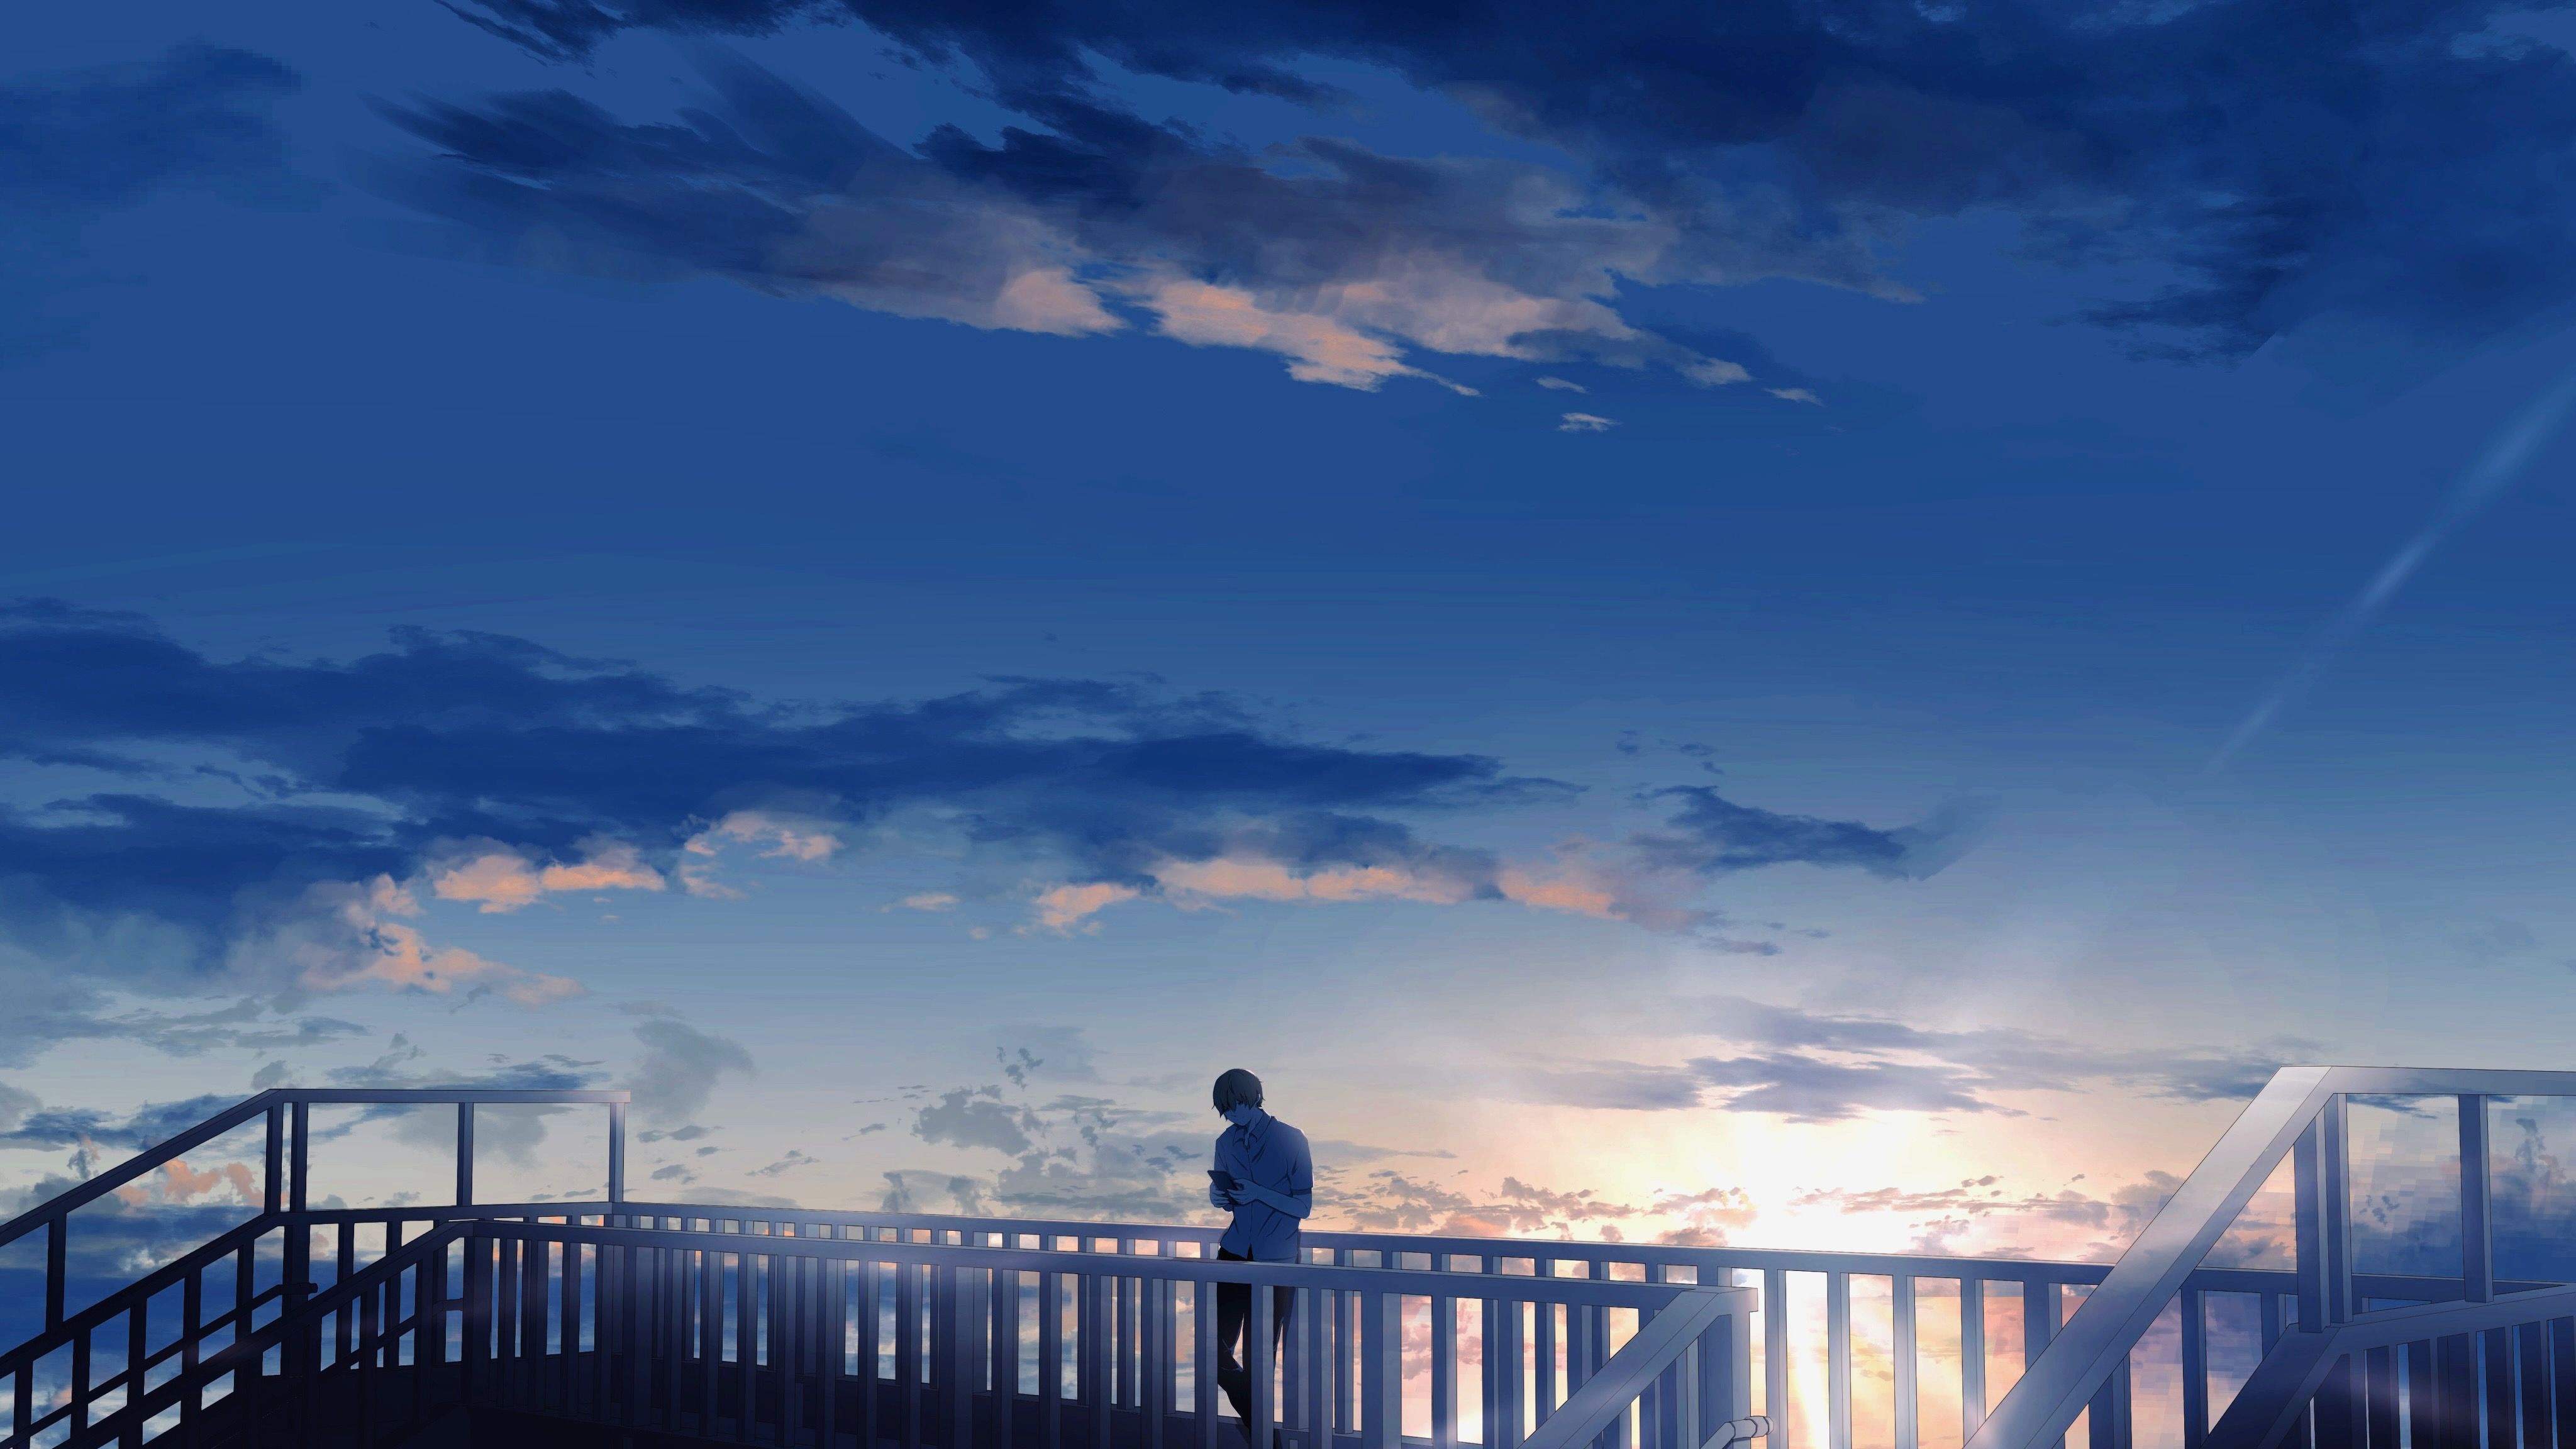 Mobile wallpaper: Anime, Sunset, Sky, Boy, 1039043 download the picture for free